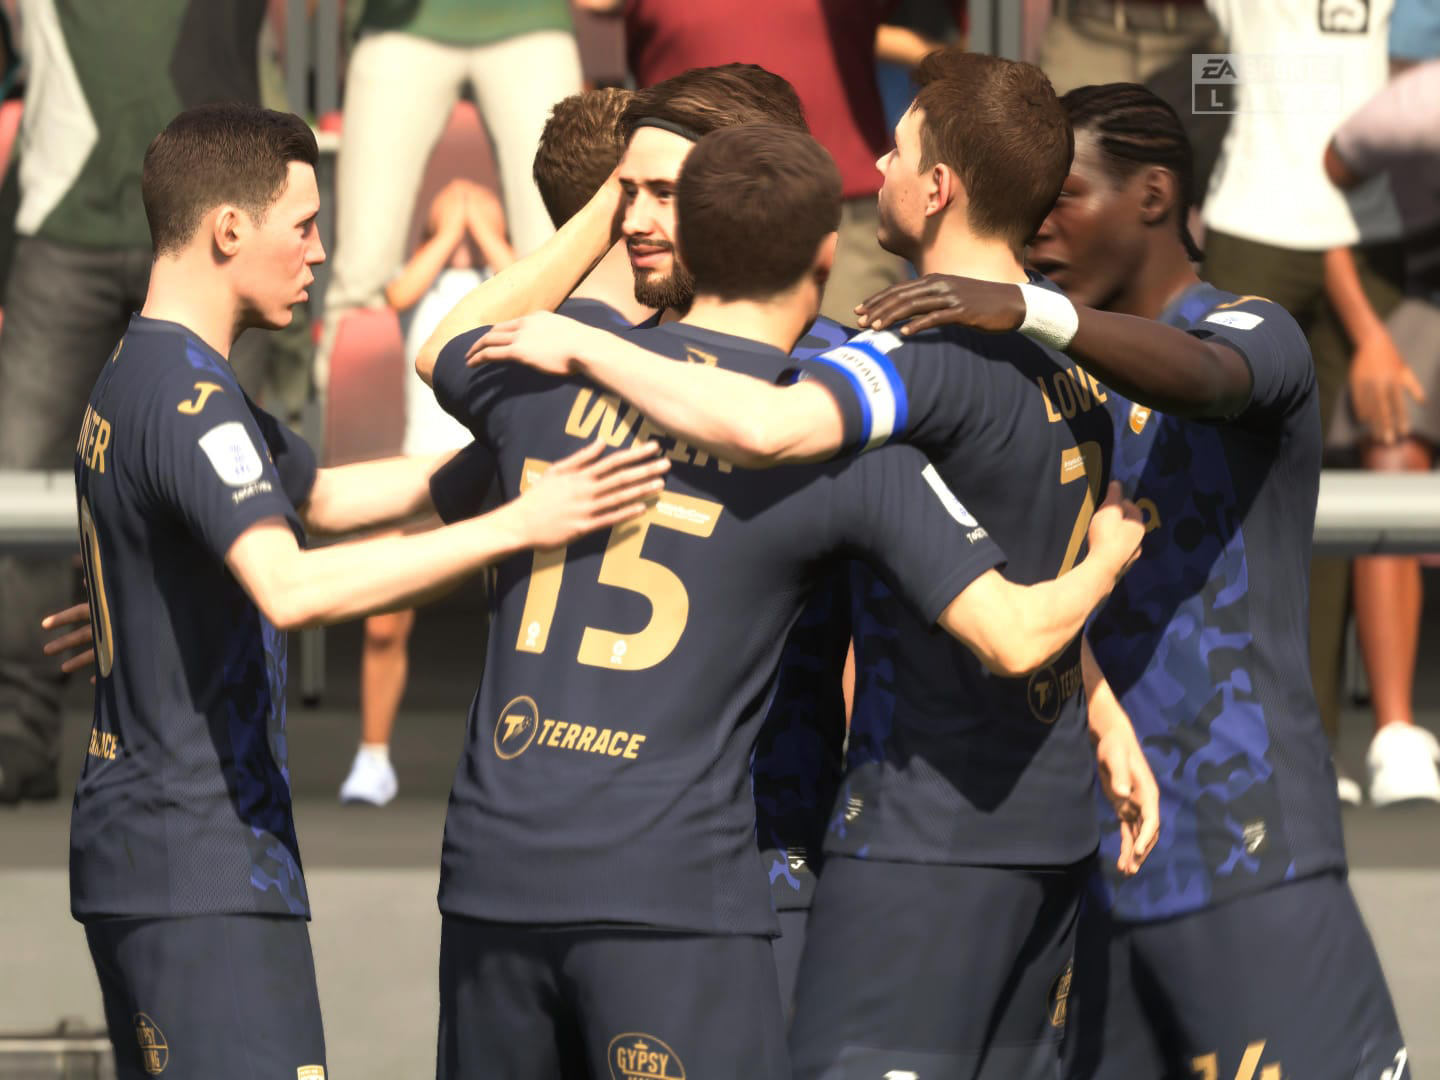 A screenshot from EA Sports FIFA showing The Terrace's kit sponsorship of Morecambe.